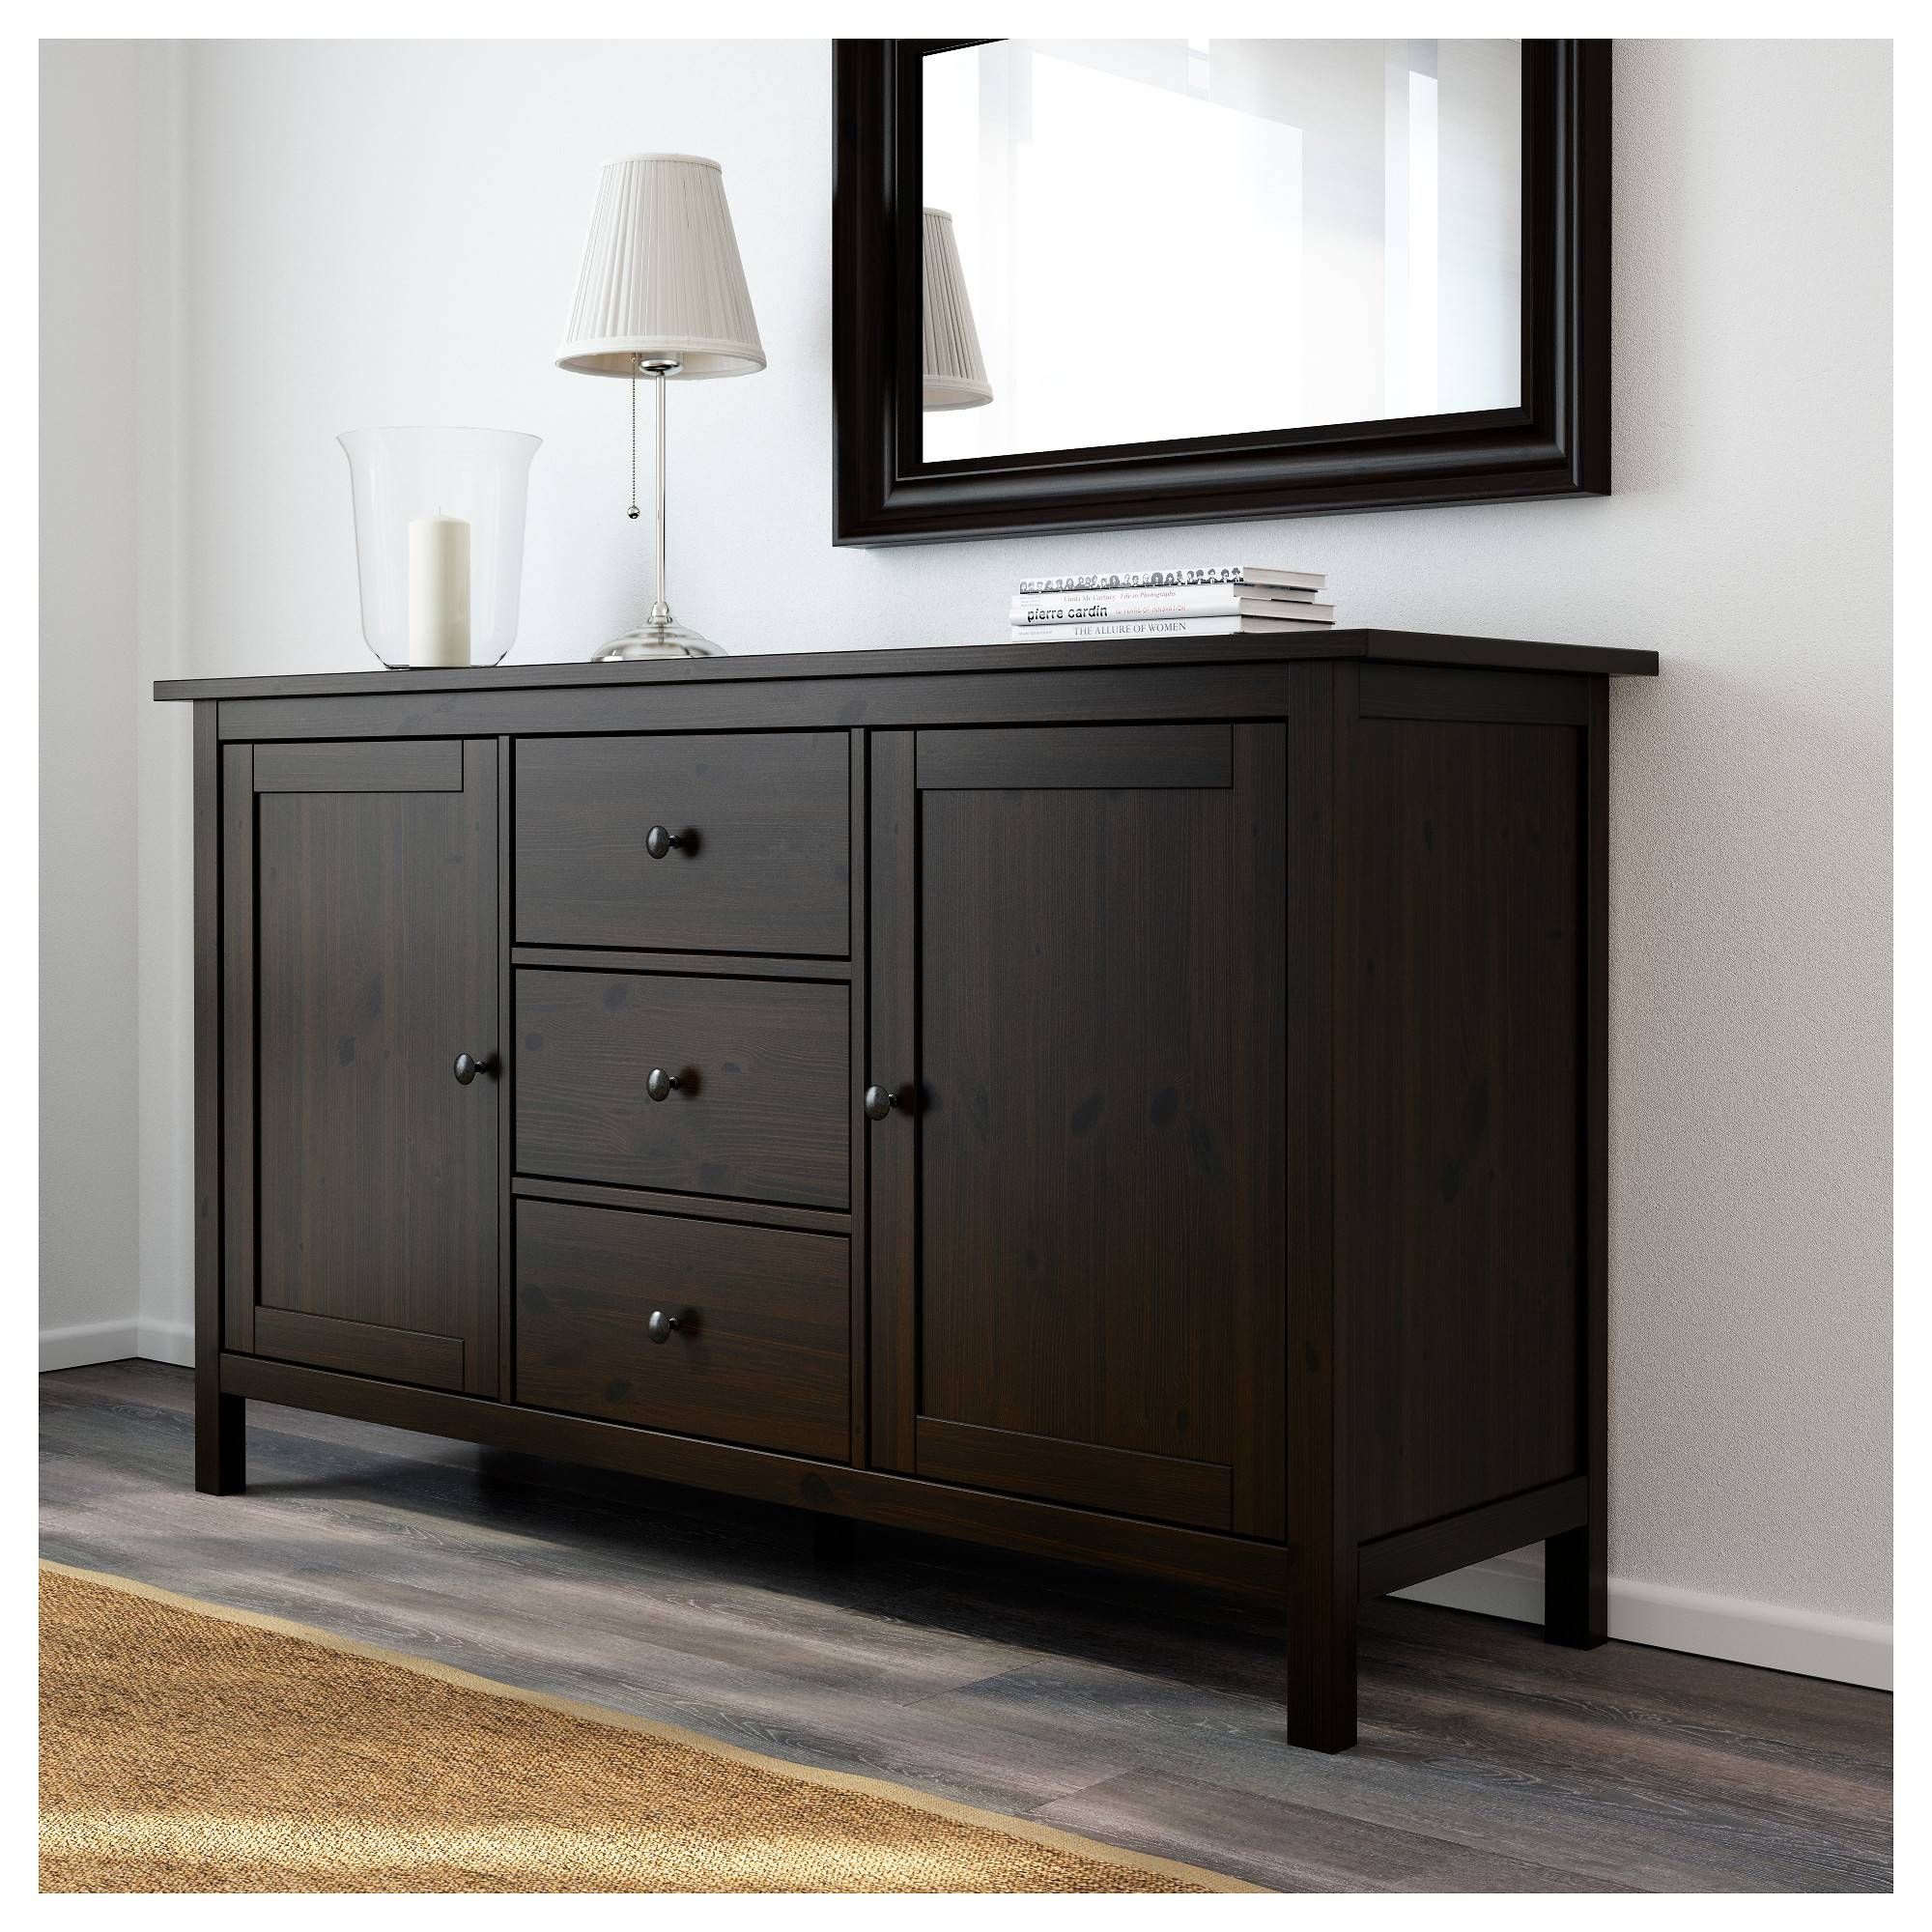 Hemnes Sideboard – White Stain – Ikea With Regard To Most Recent Canada Ikea Sideboards (View 3 of 15)